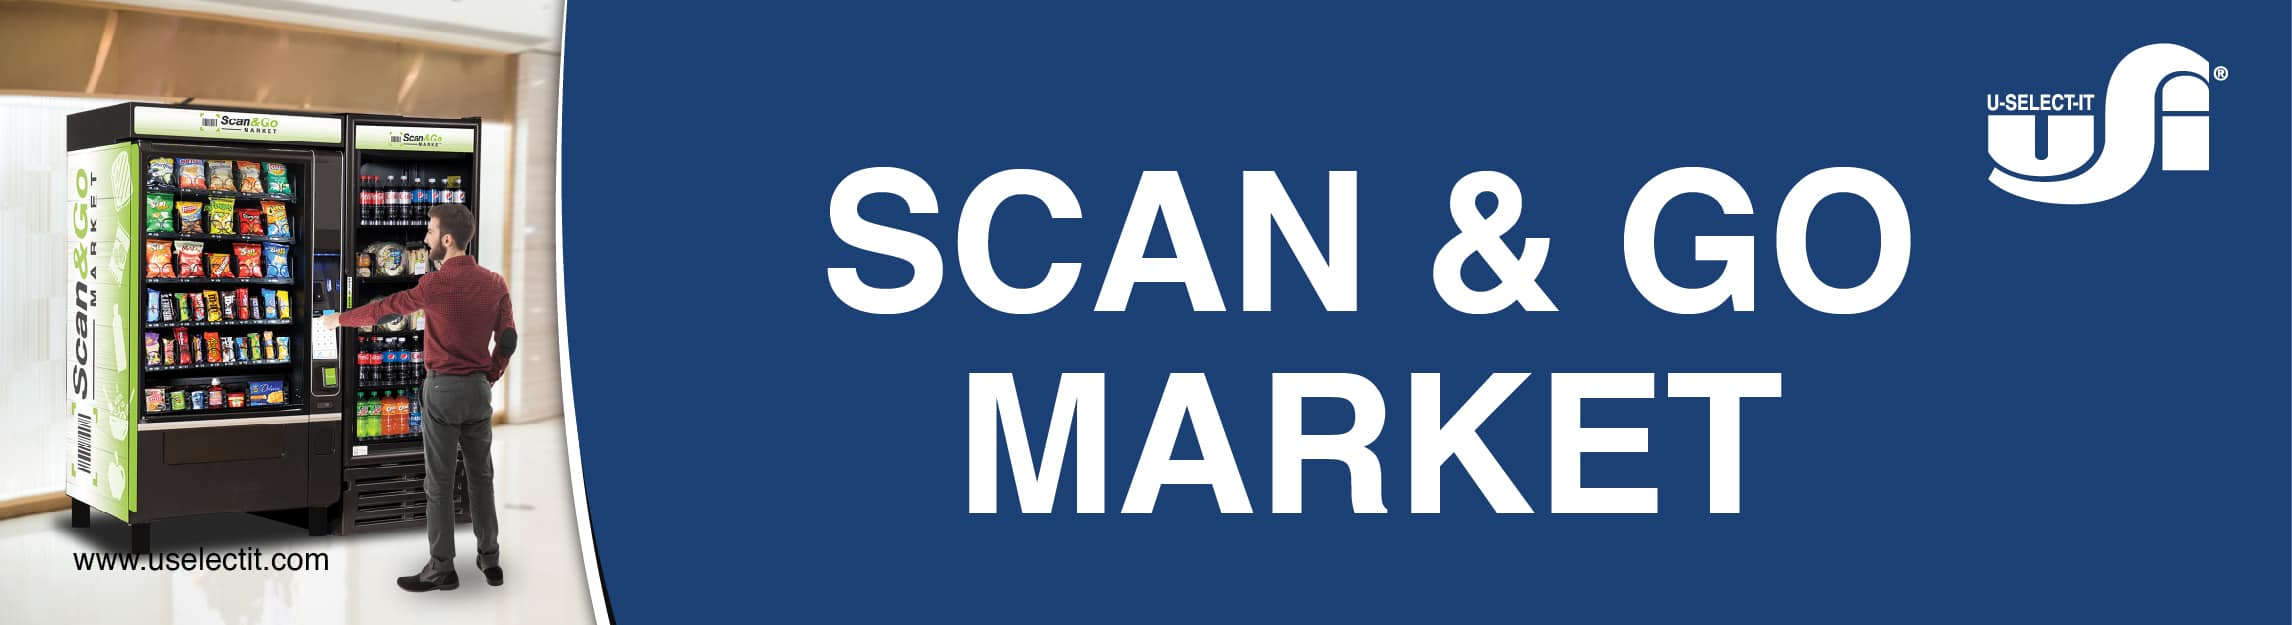 Revolutionizing Retail: How Scan & Go Markets are Pioneering New Location Opportunities
